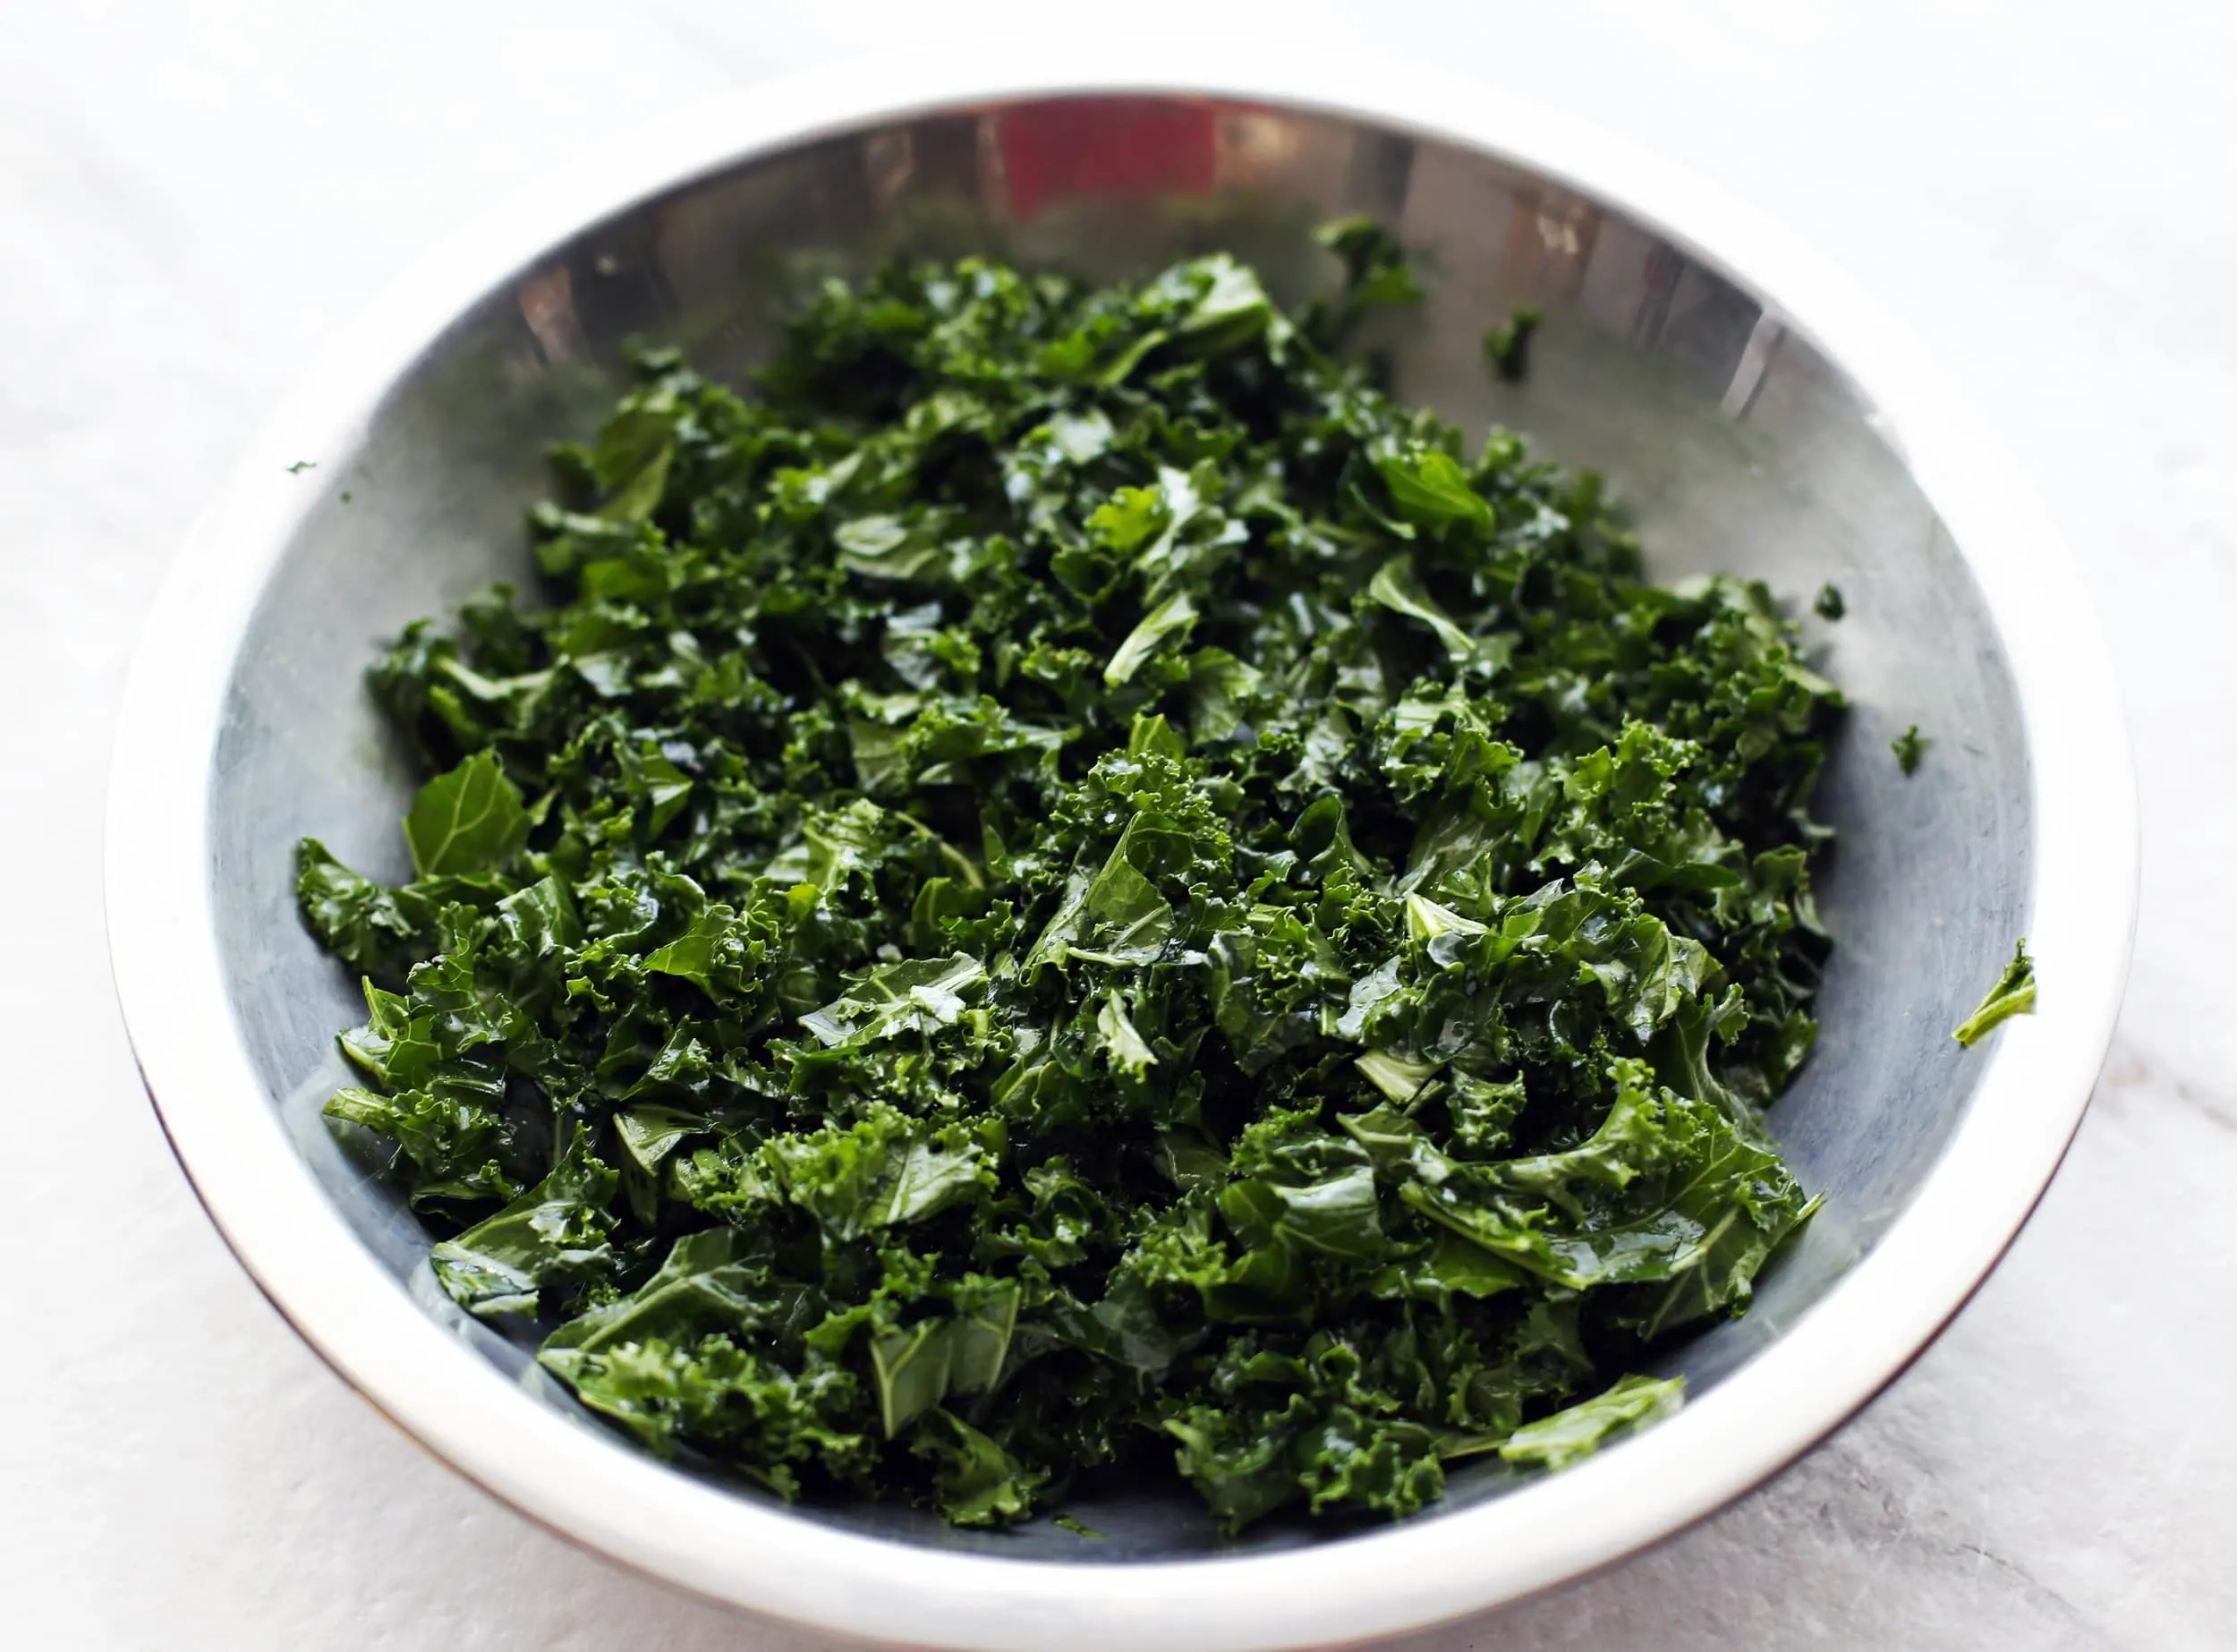 Finely chopped kale tossed with olive oil and salt.